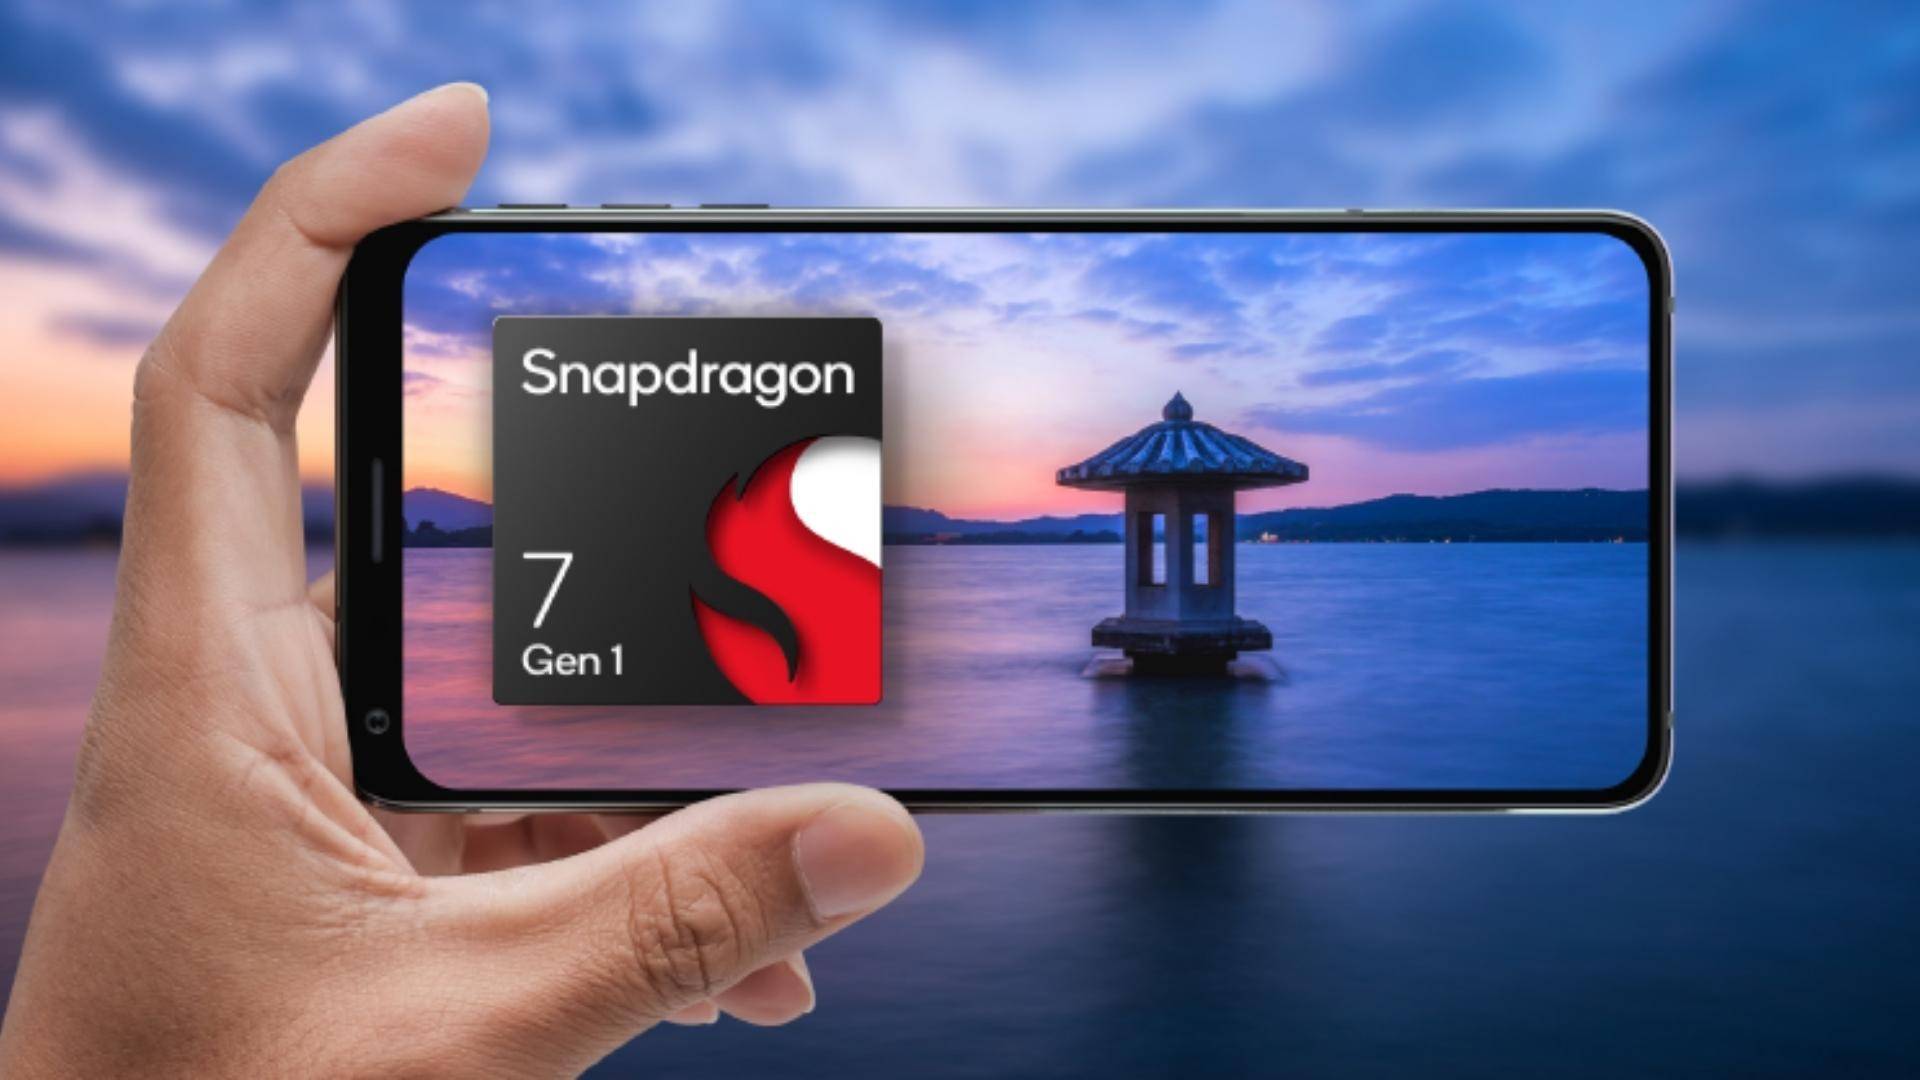 an image of a phone capturing a scenic background with a snapdragon 7 gen 1 render on display too